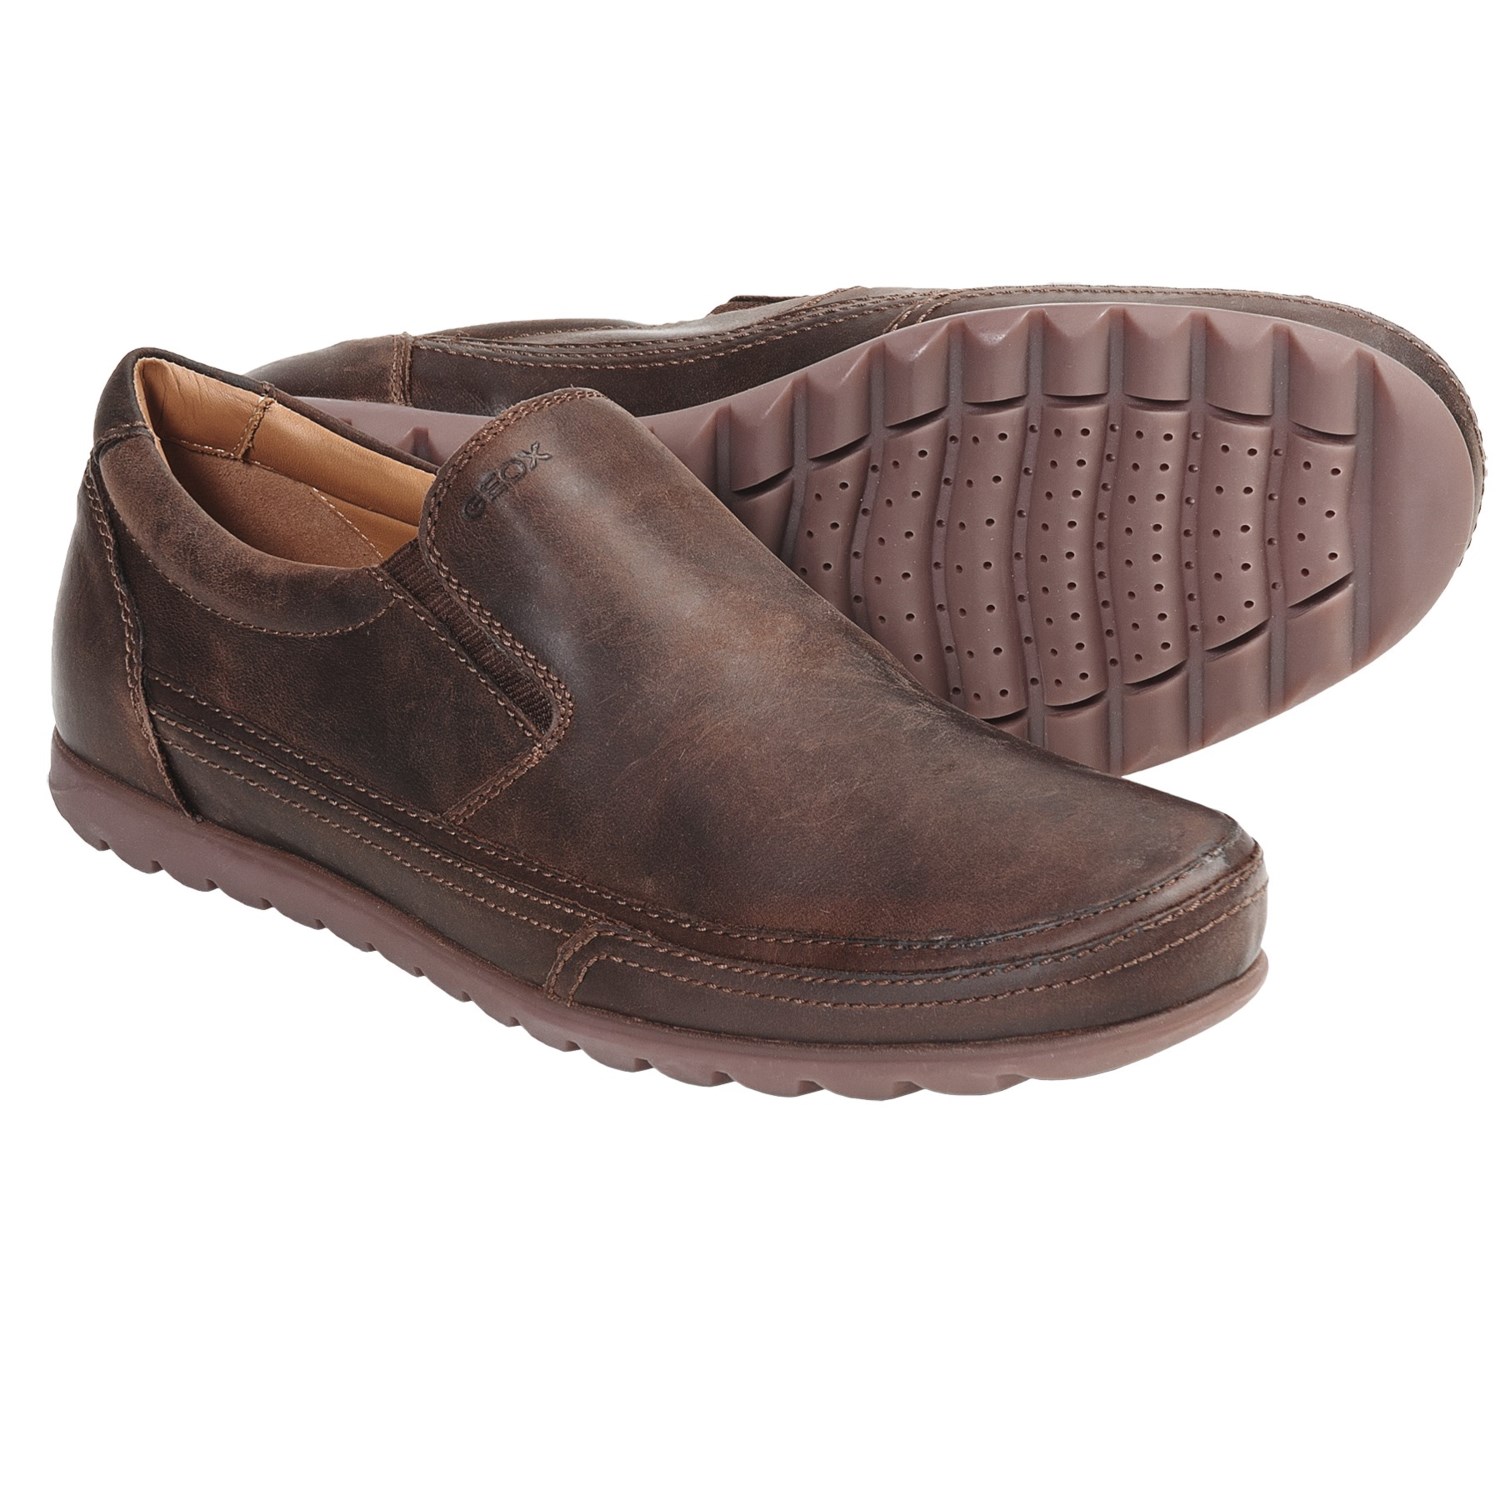 Geox Flexi Shoes - Slip-Ons (For Men) - Save 35%